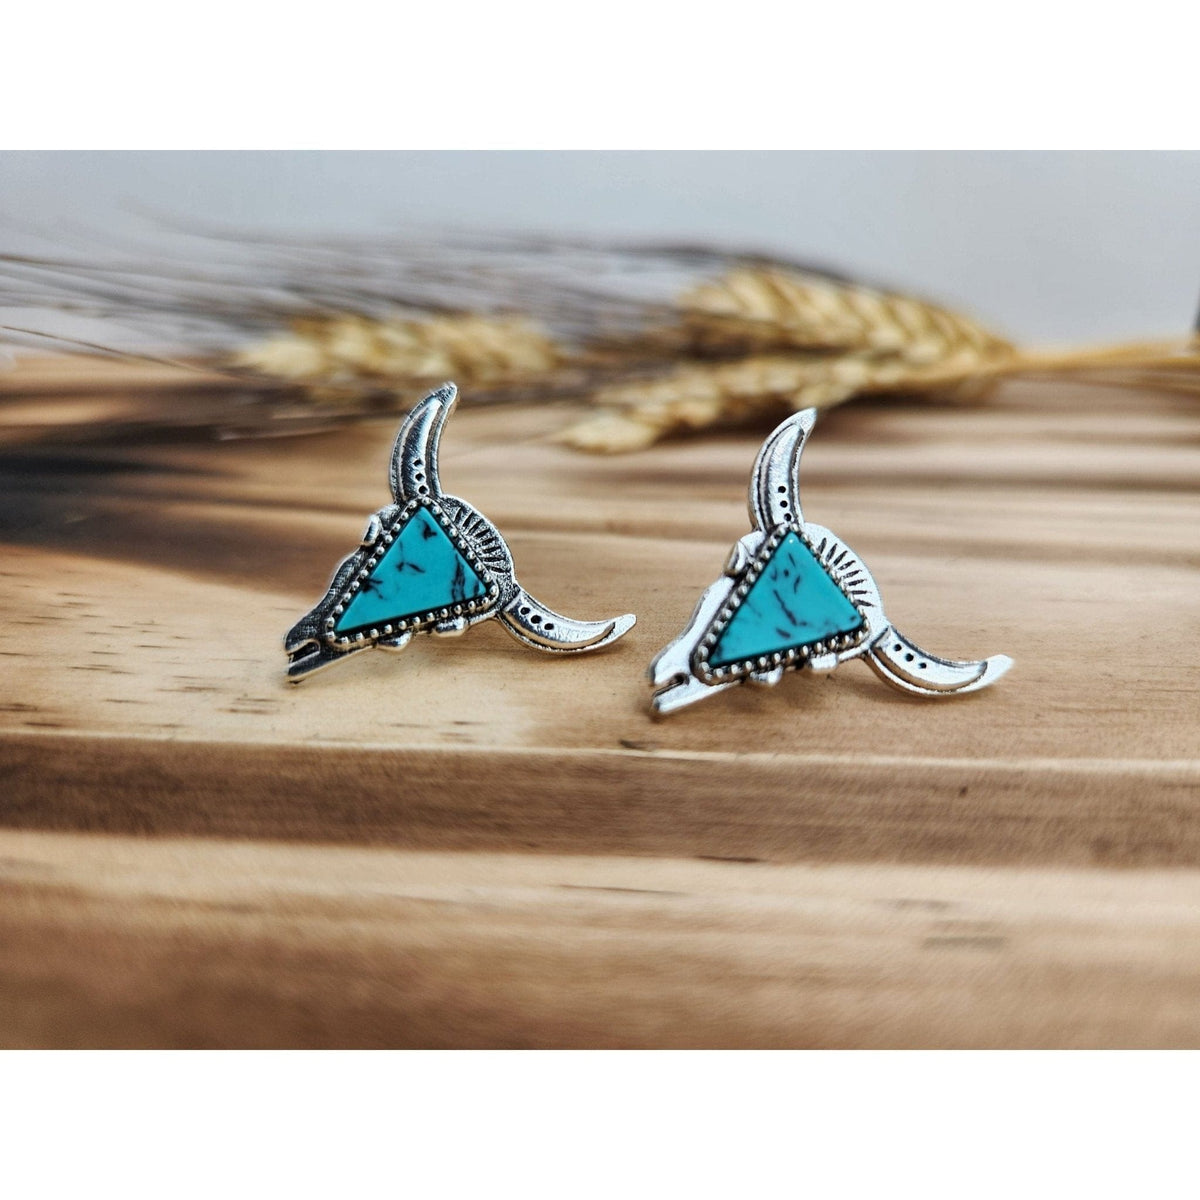 Texas Longhorn Silver and Turquoise Earrings Earrings TheFringeCultureCollective